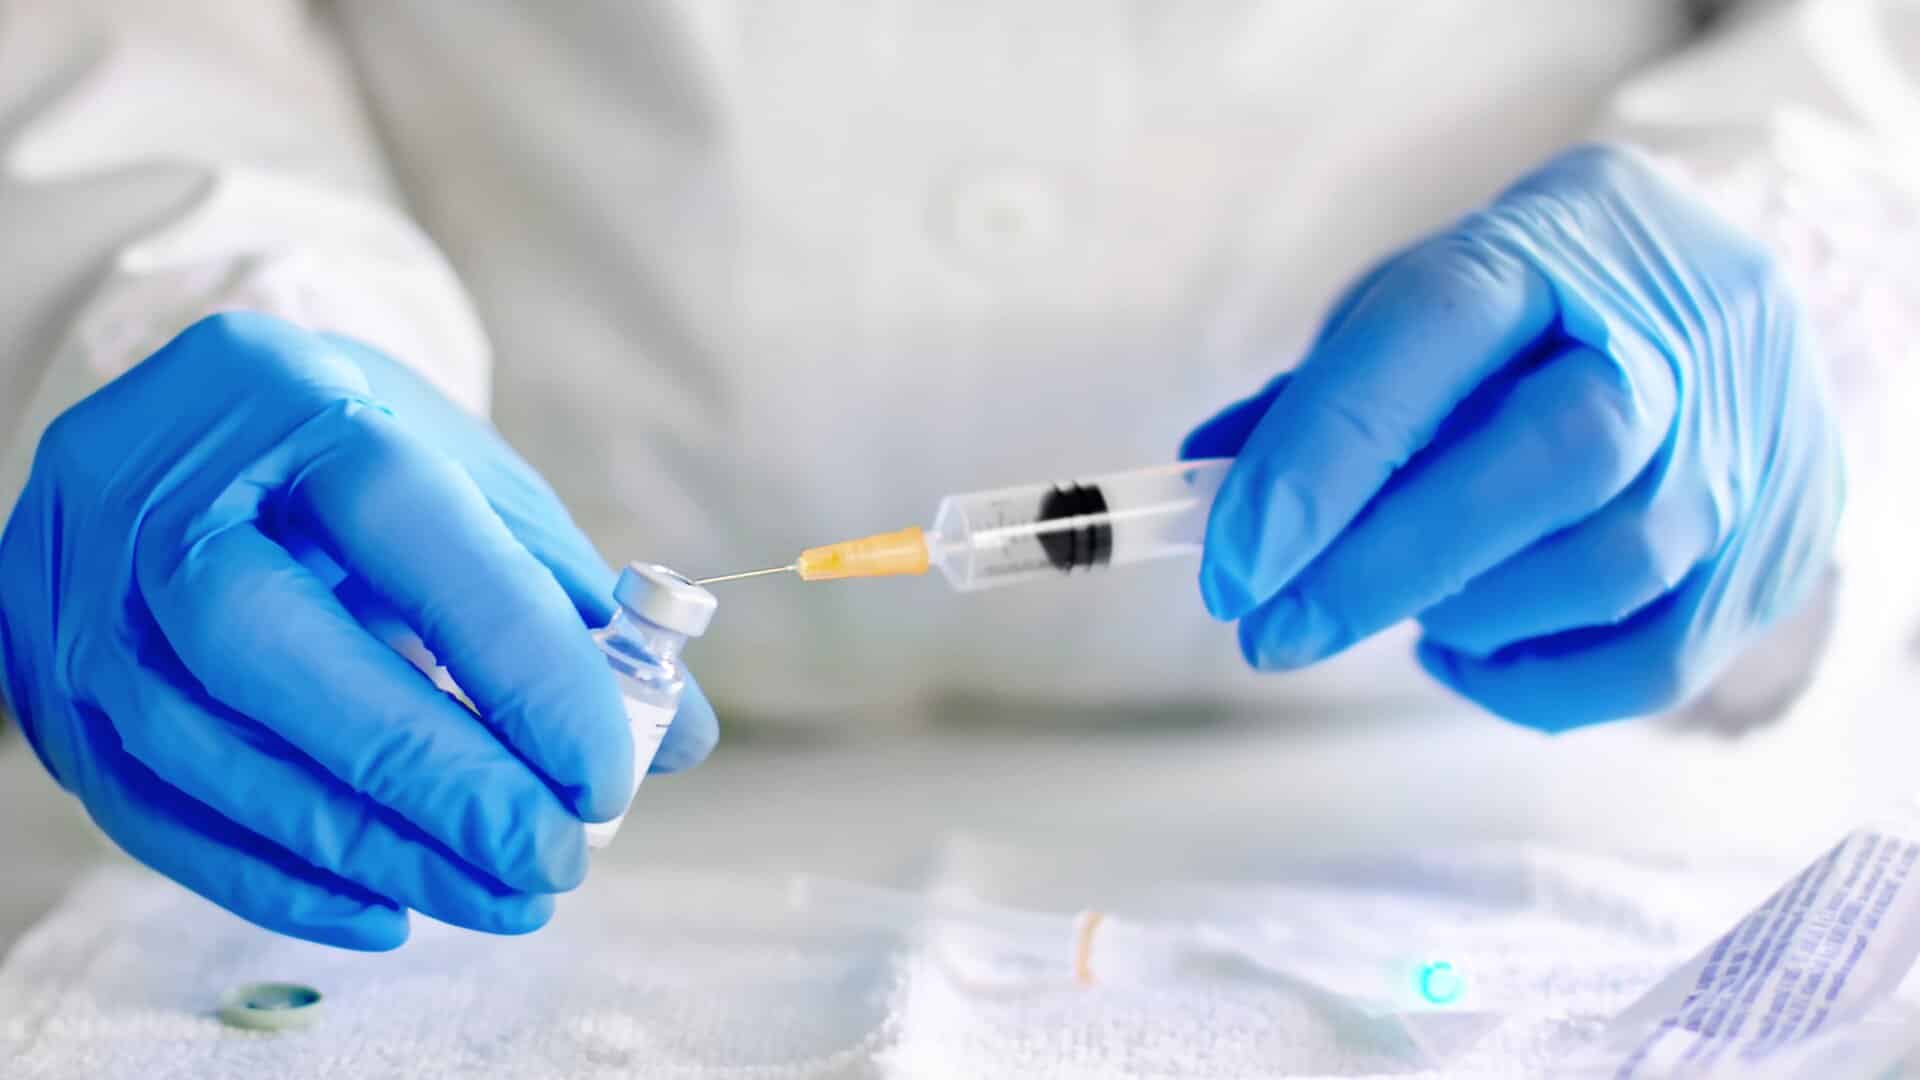 No need for COVID-19 booster shots at this stage, inoculate more people with first jab: Experts